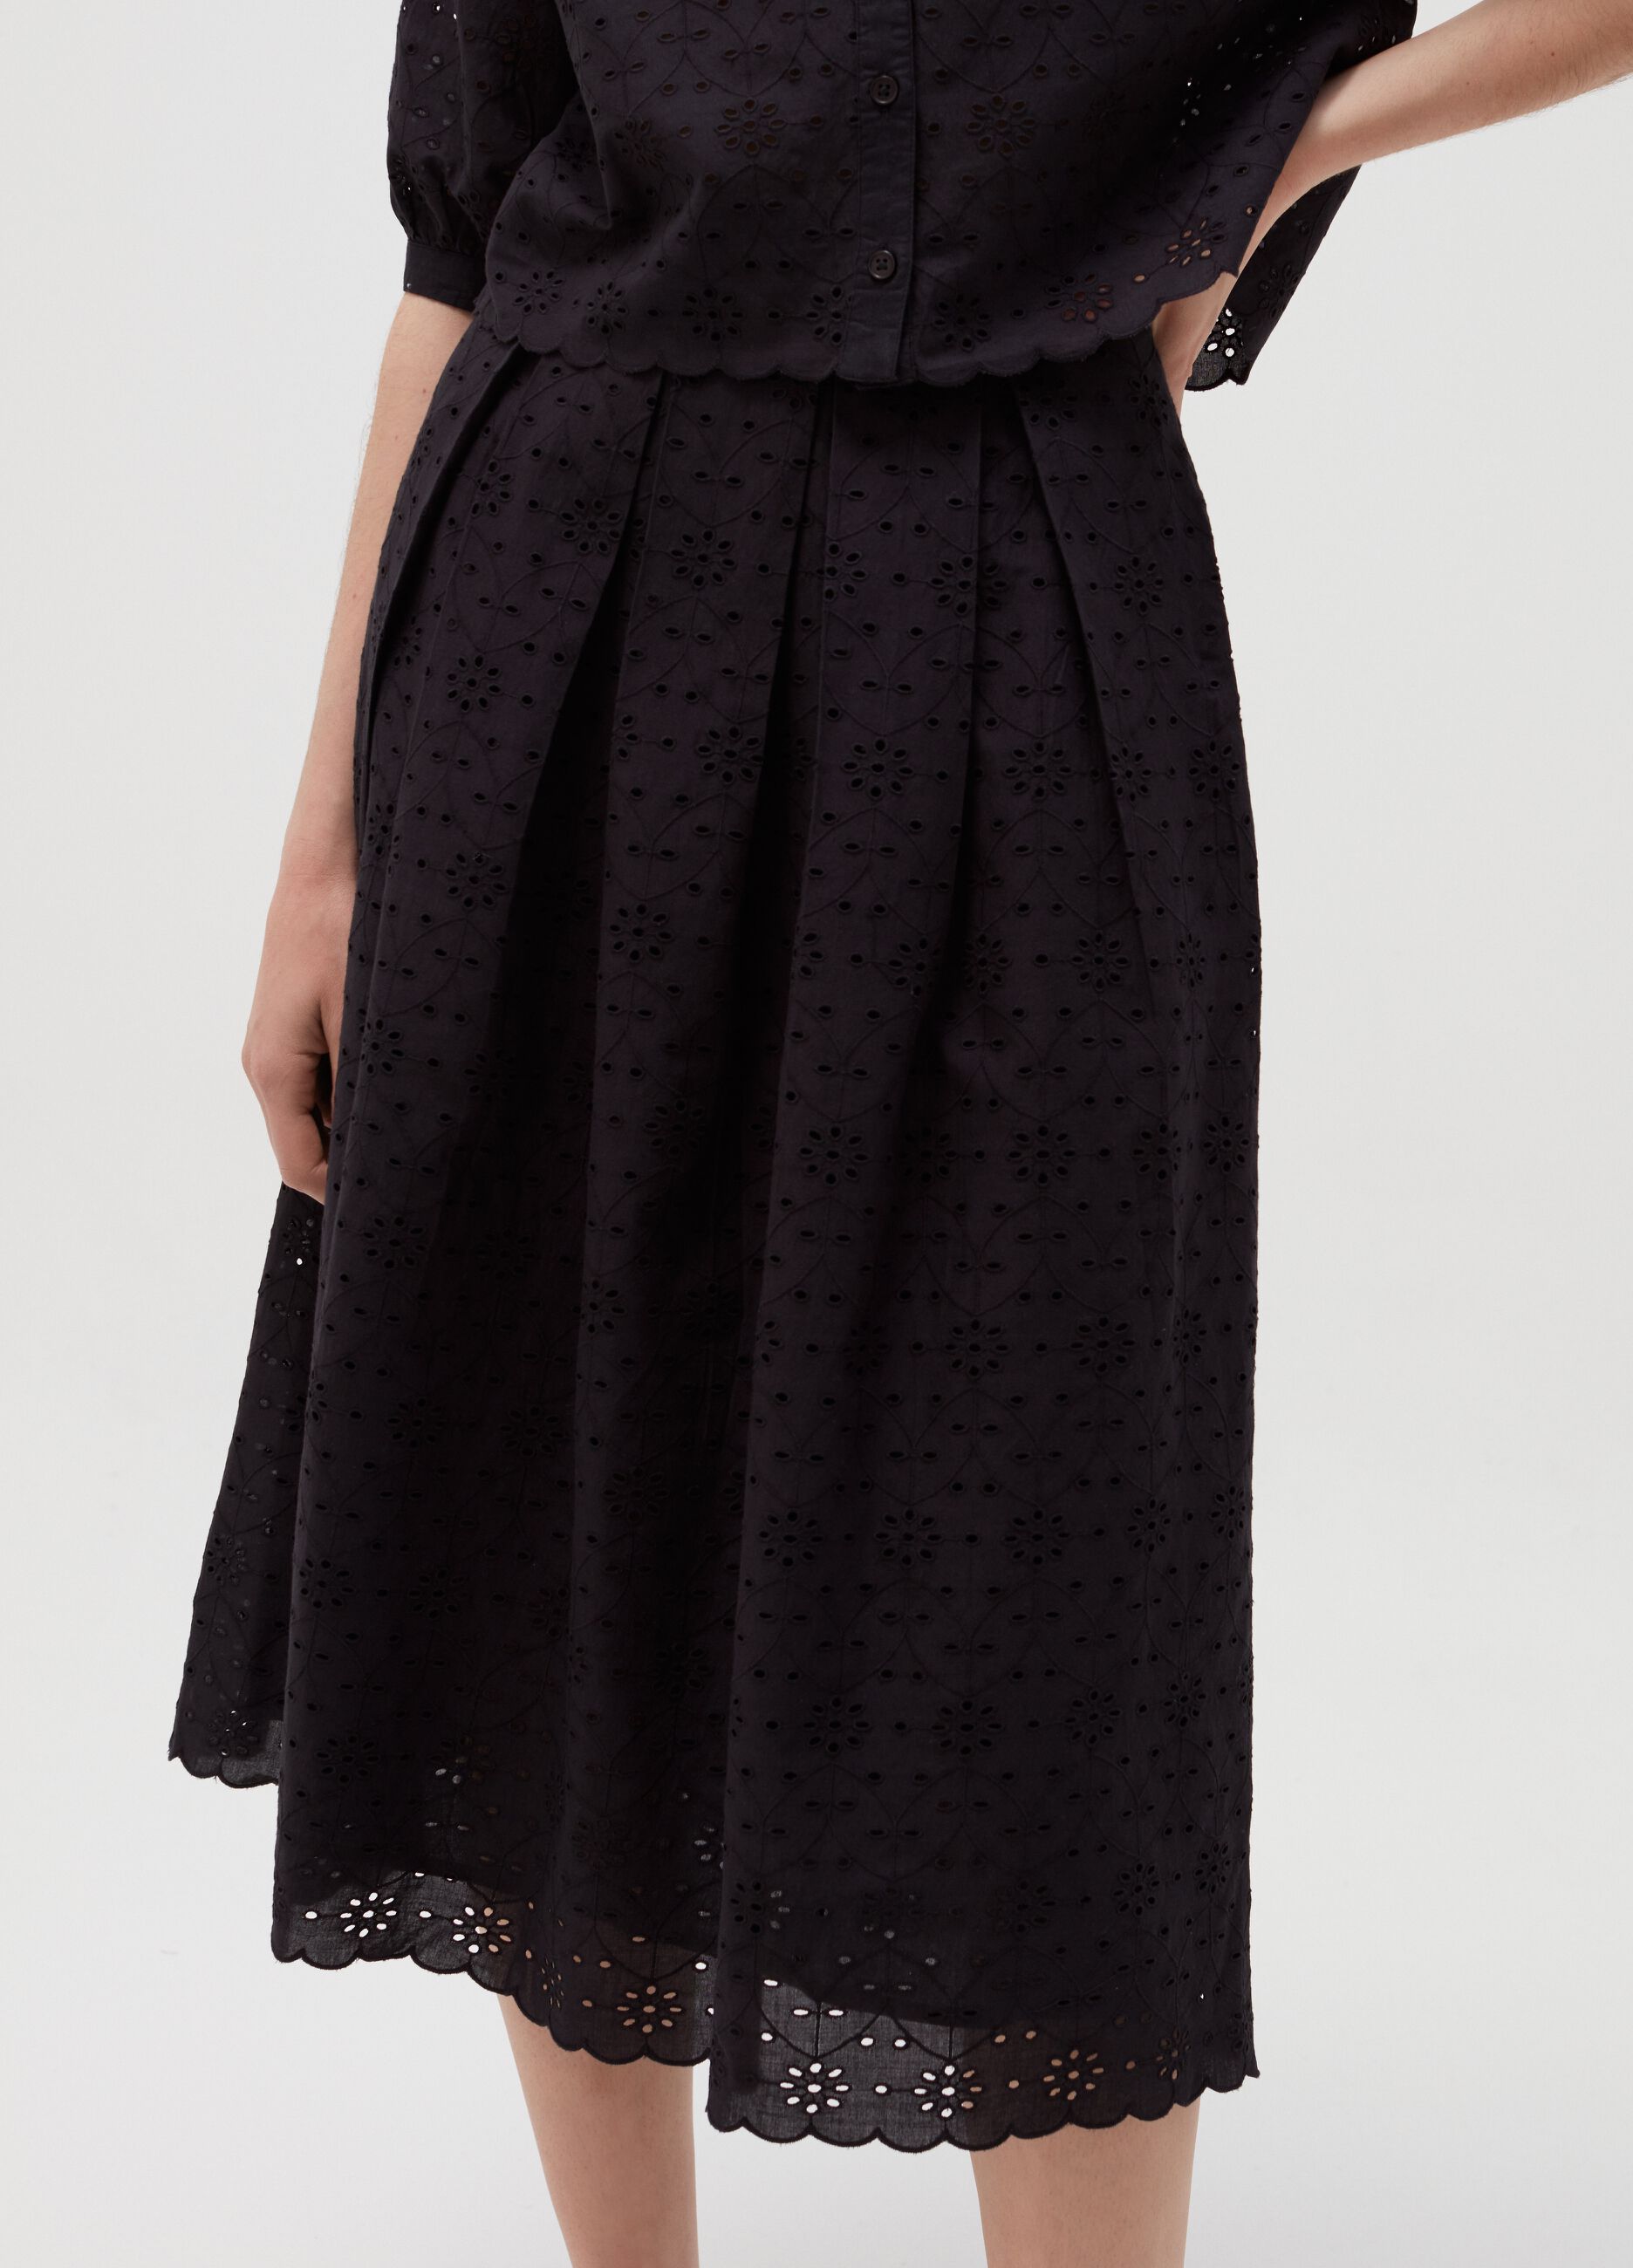 Midi skirt in broderie anglaise